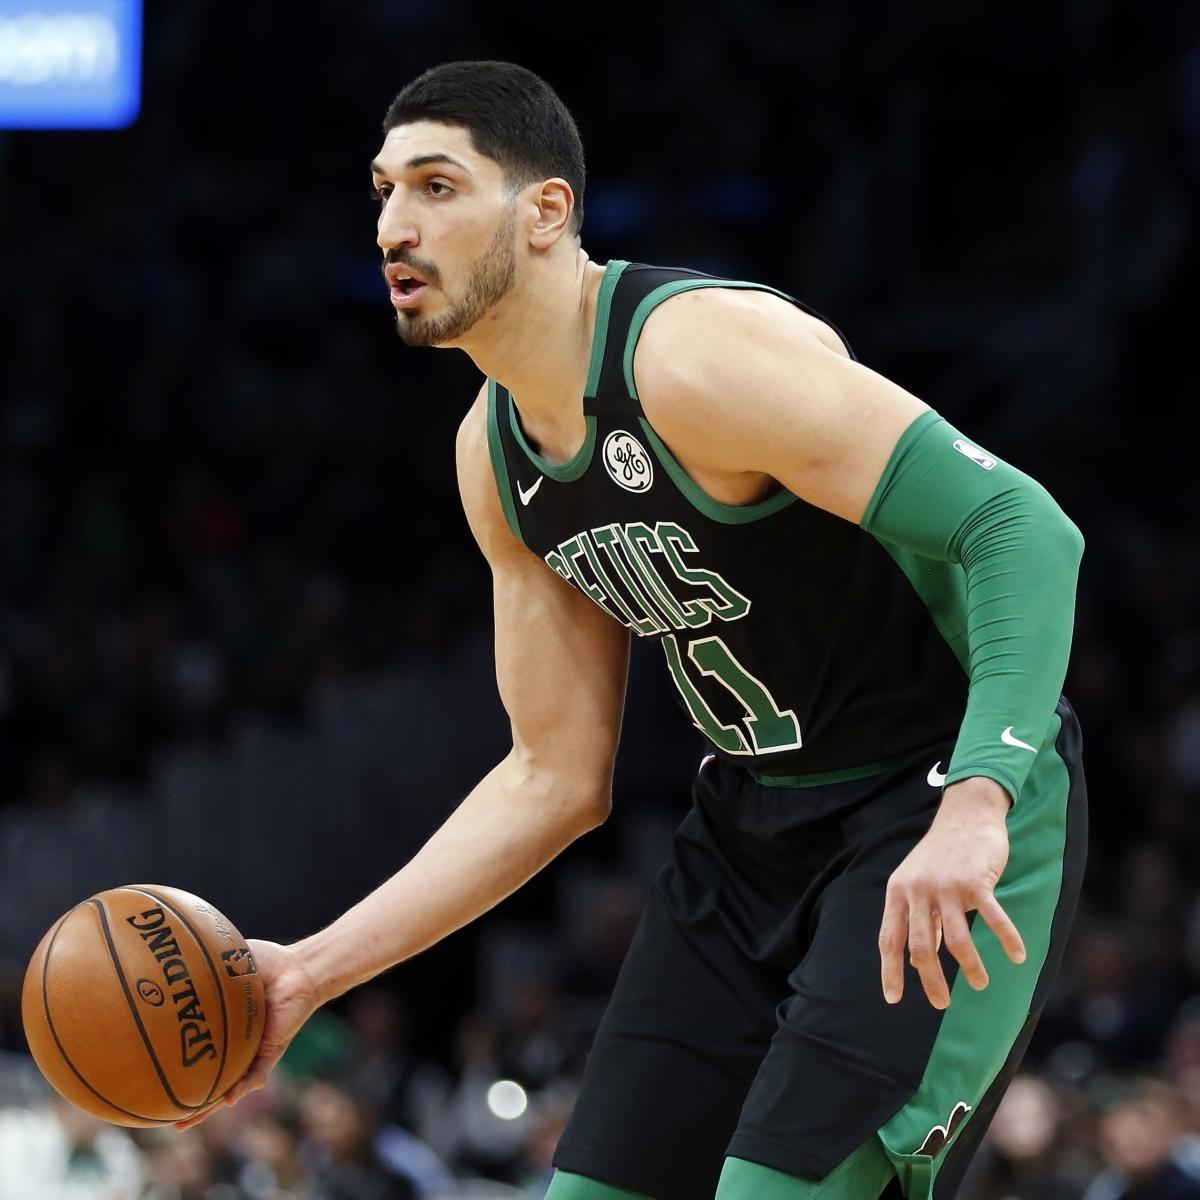 Celtics Video: Marcus Smart and Enes Kanter's Swim Race Comes Down to the Wire thumbnail